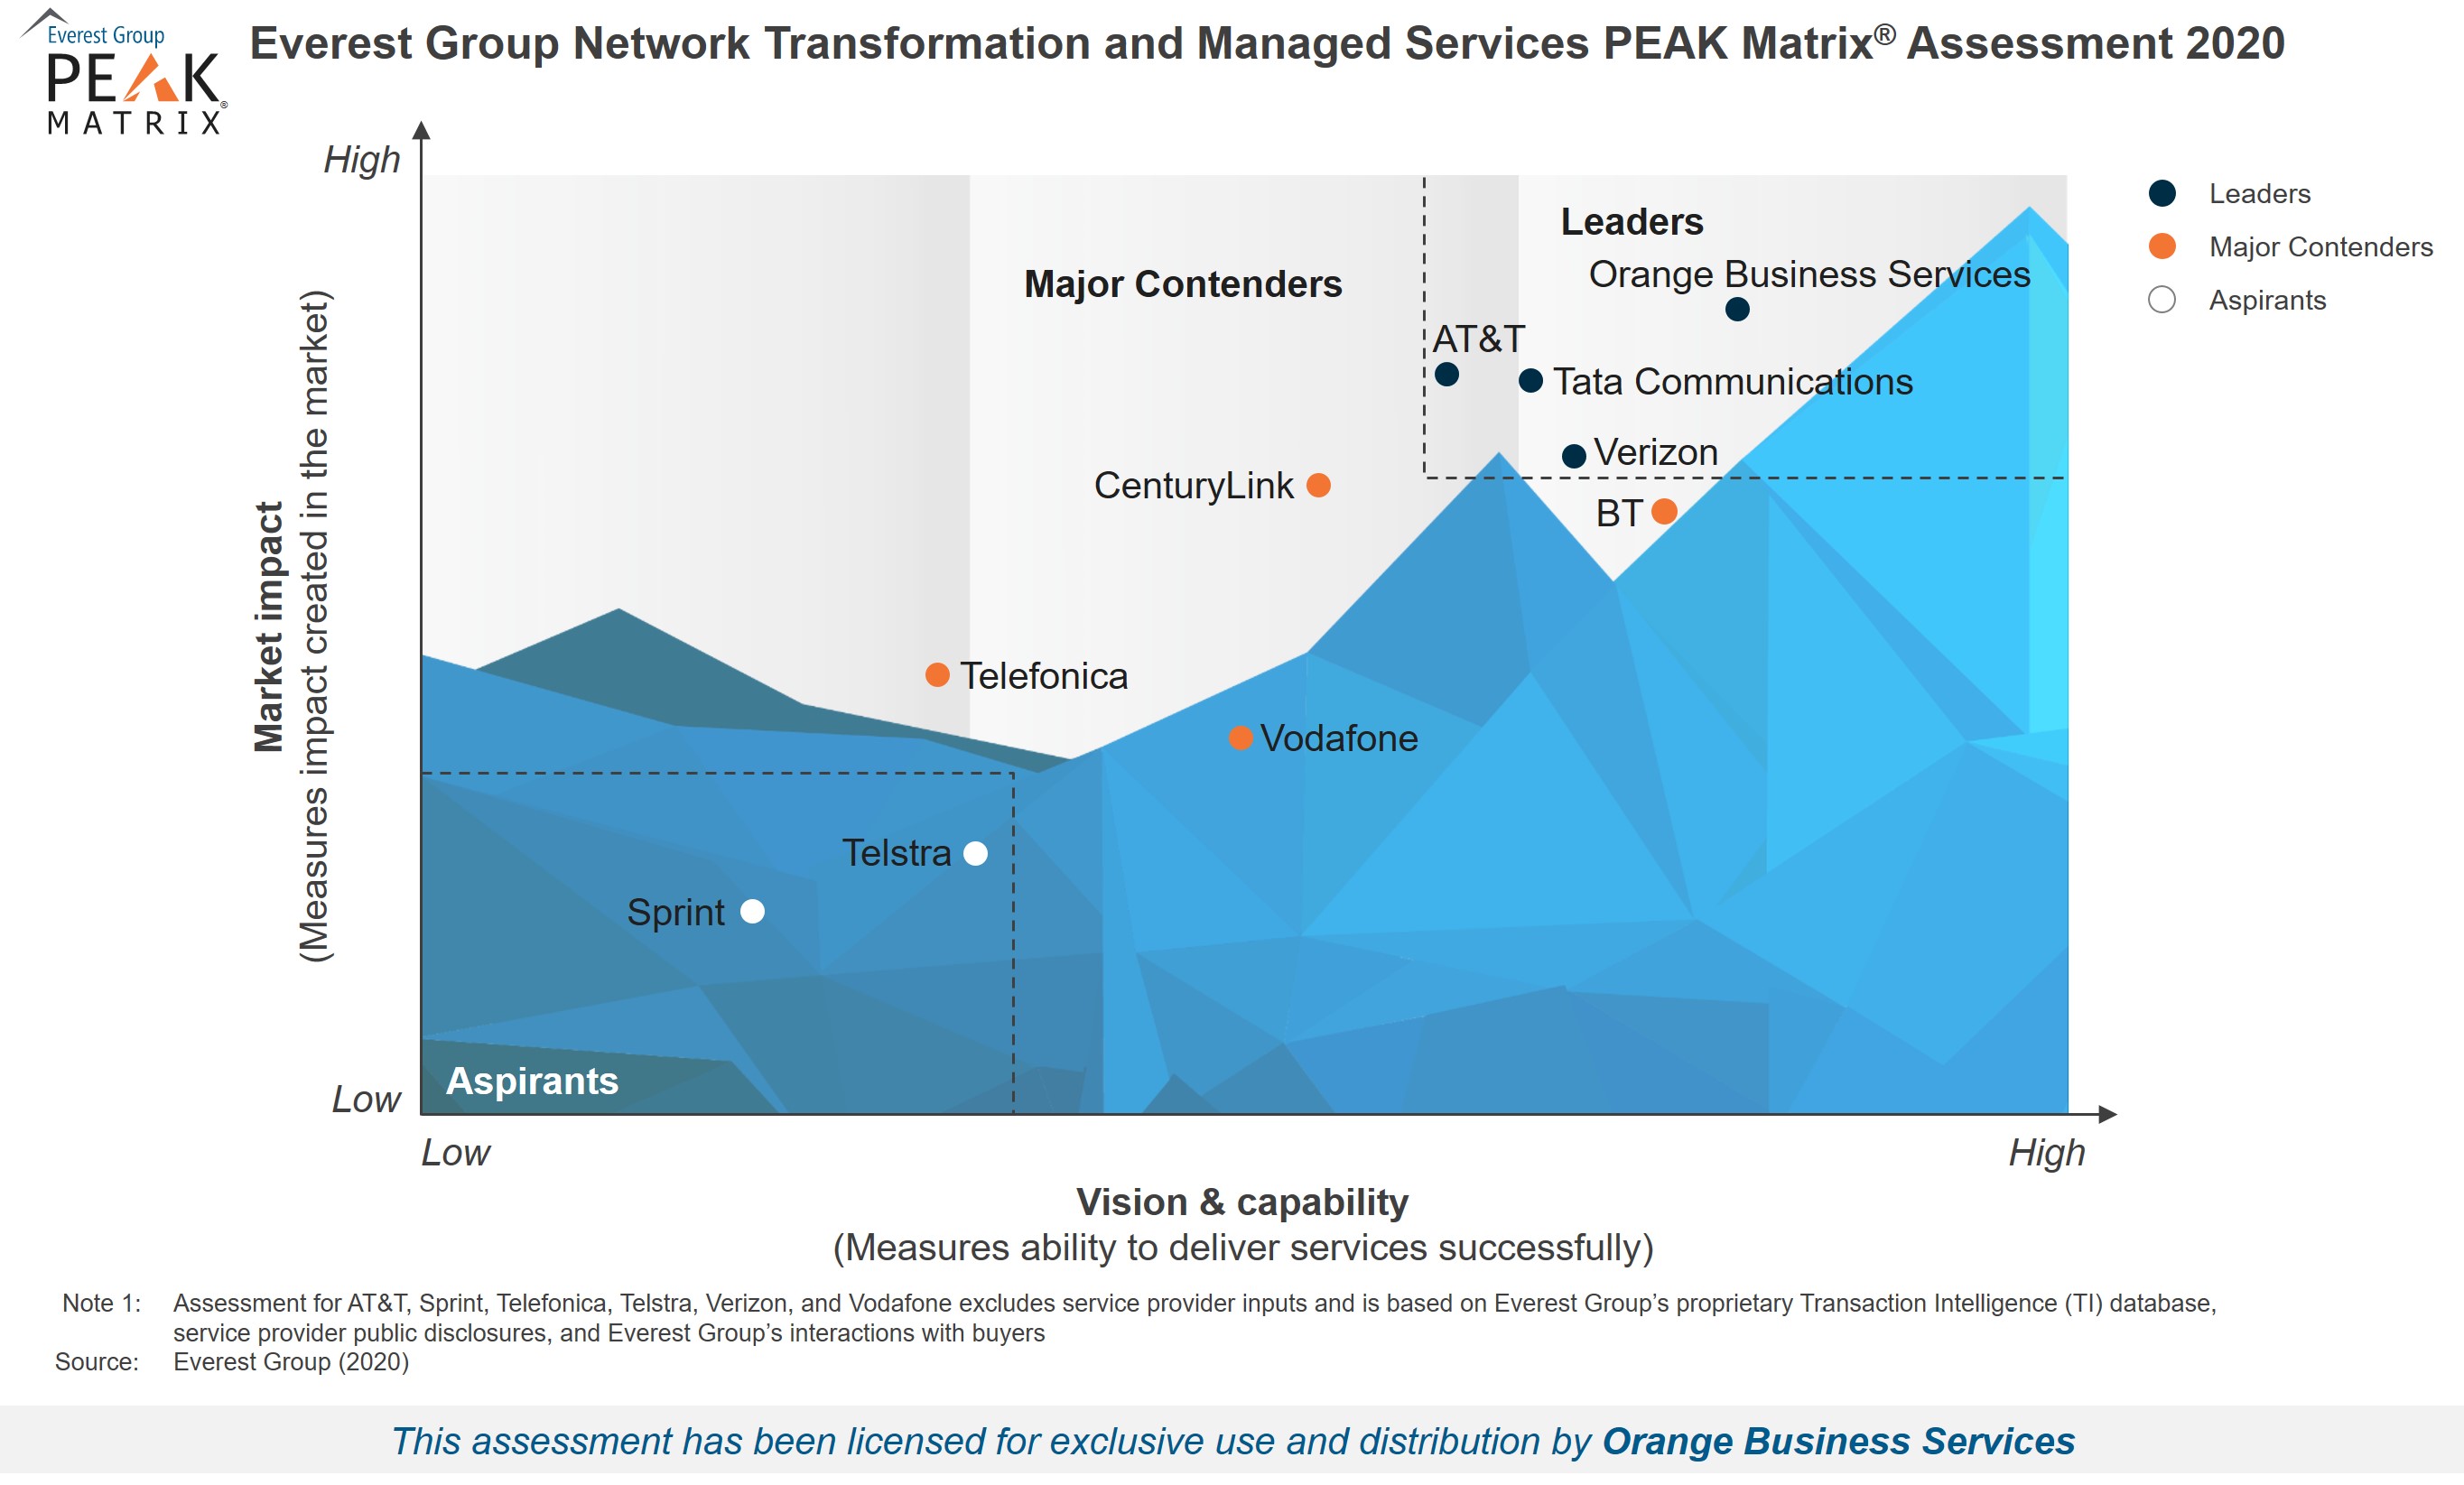 Everest Group PEAK Matrix Assessment for Network Transformation and Managed Services Providers 2020